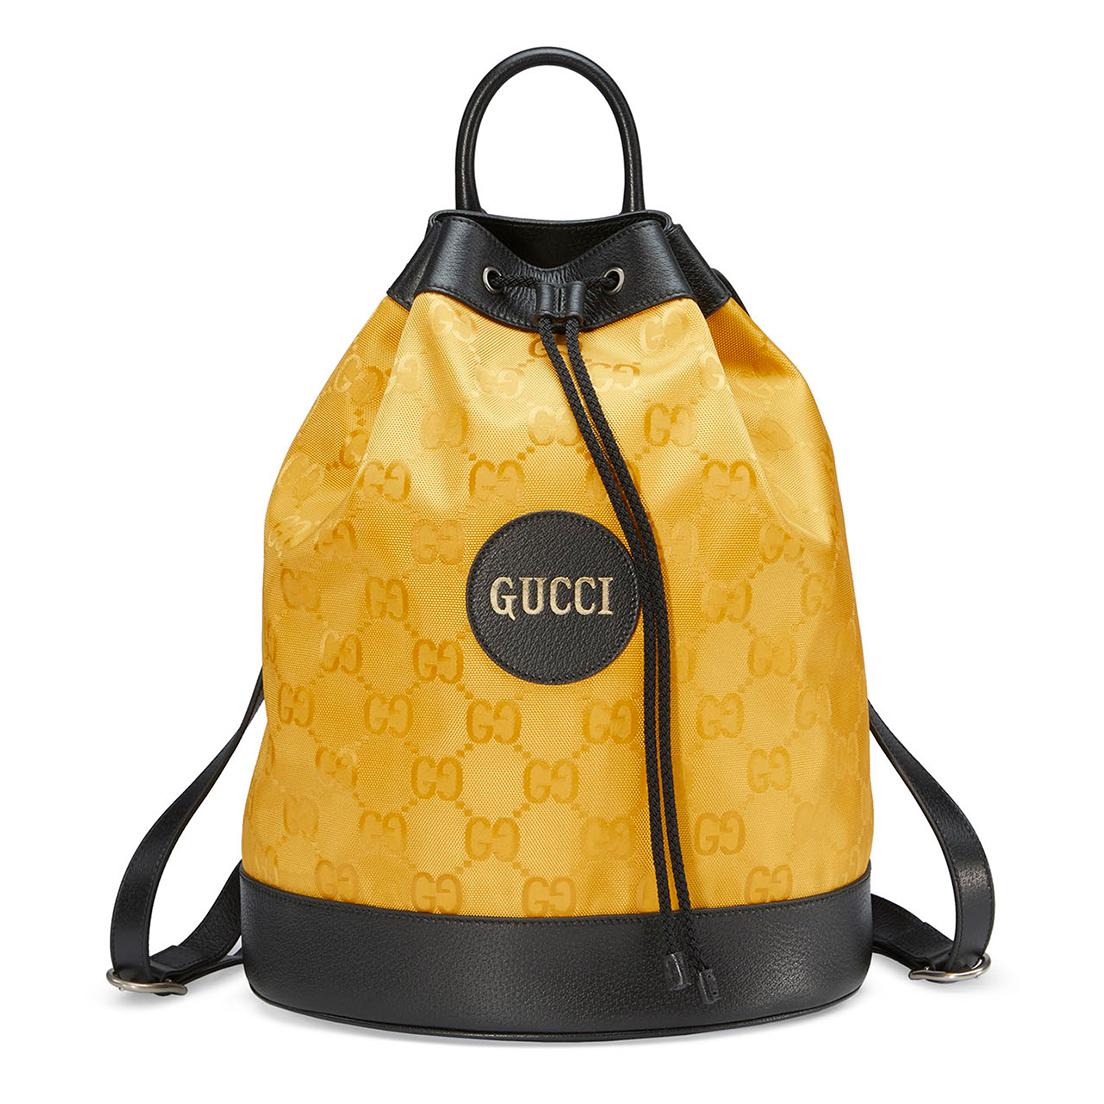 〈Gucci Off The Grid〉バックパック 200,000円。